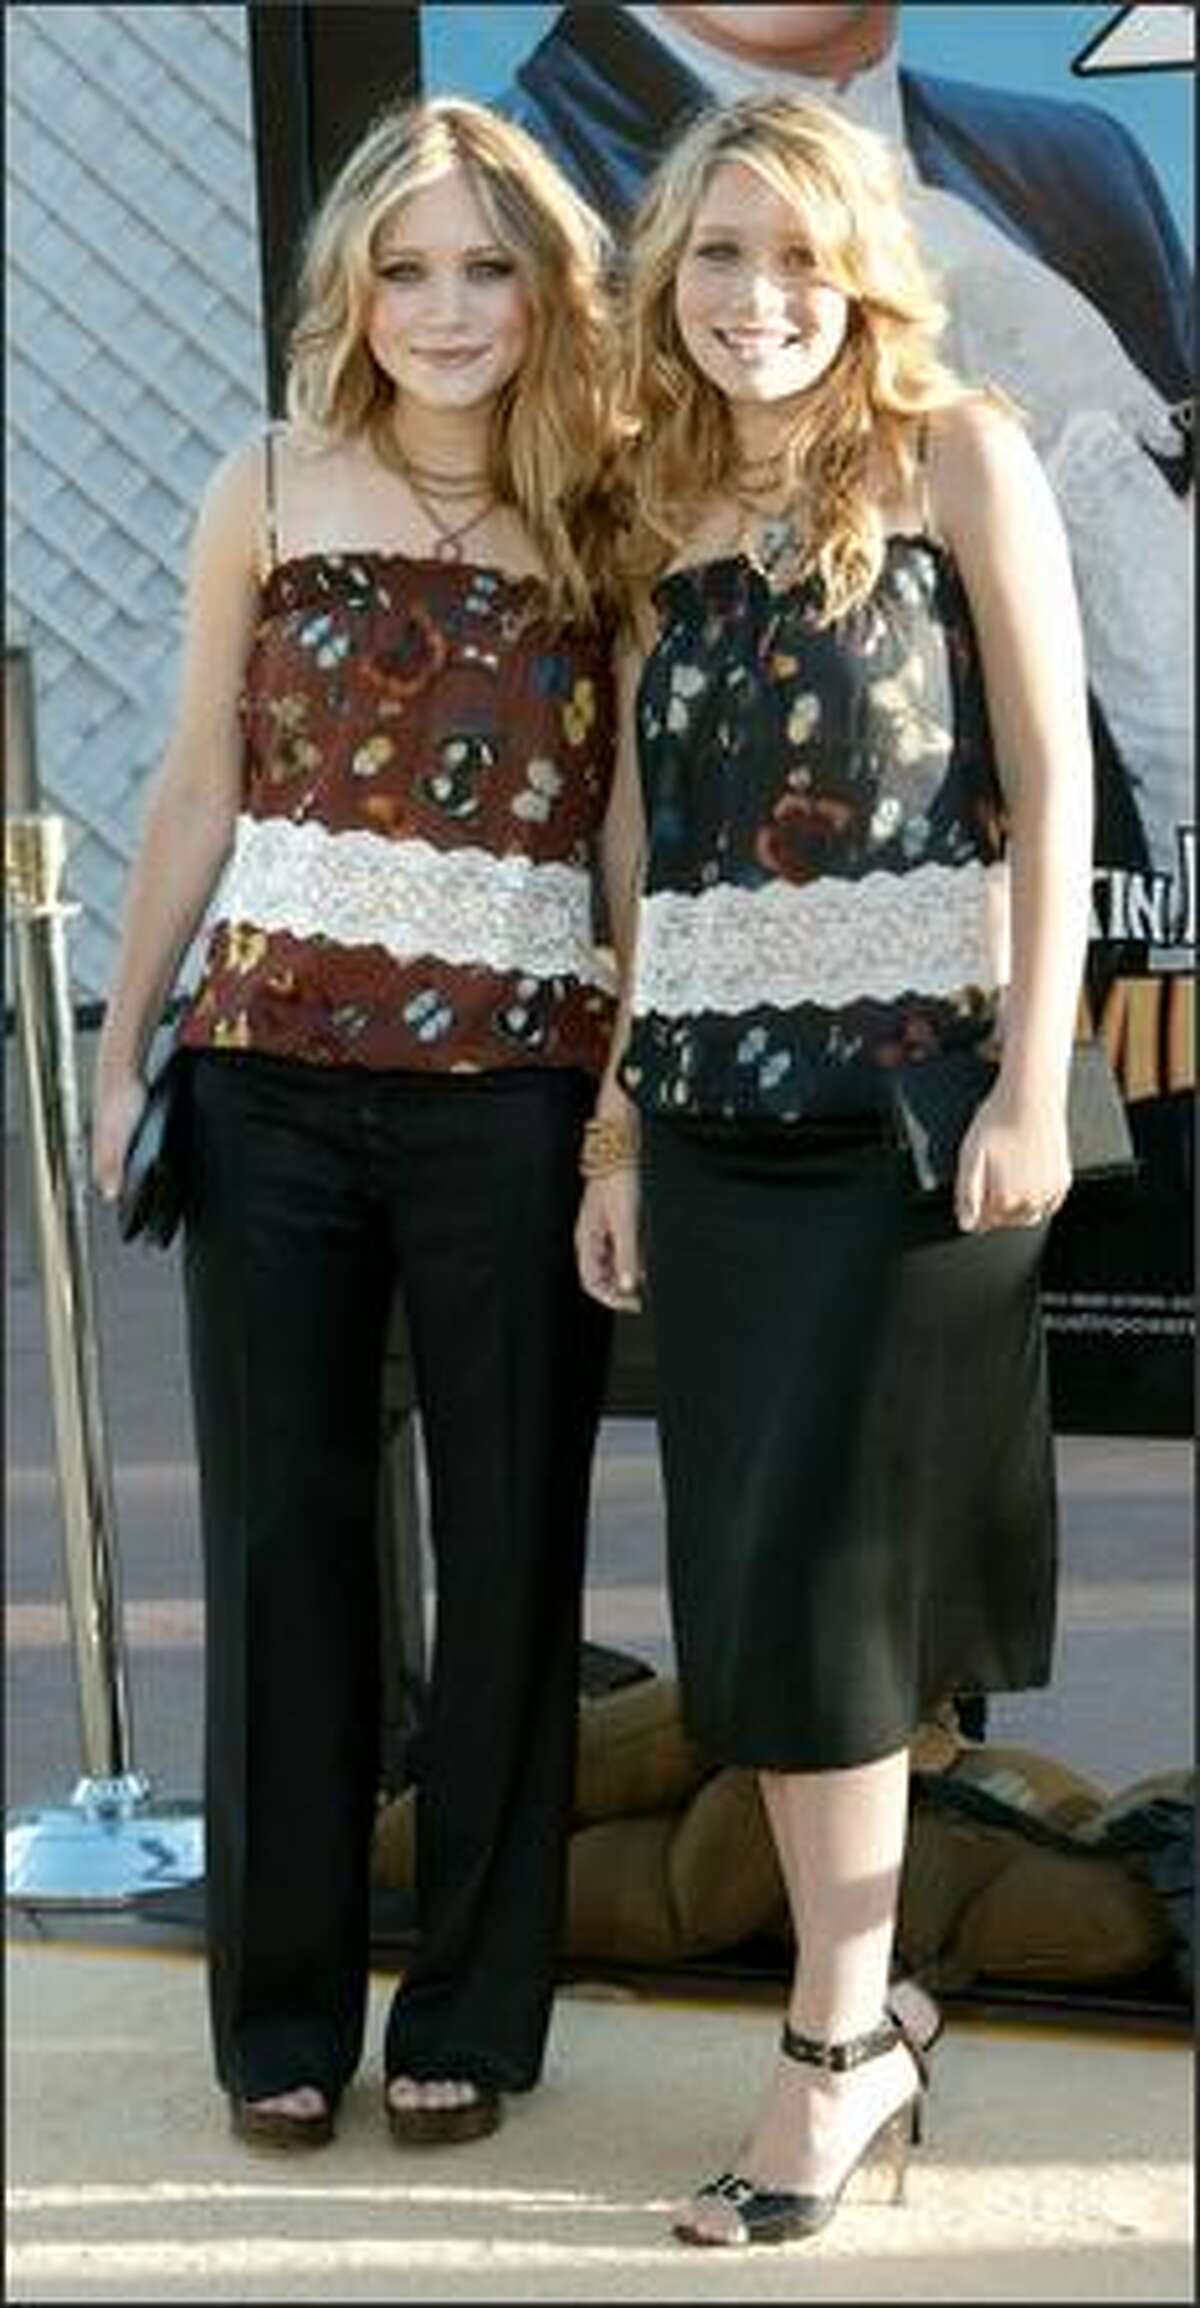 The last vestiges of the twins dressing as one ... Mary-Kate (left) and Ashley attend the premiere of "Austin Powers in Goldmember" in Los Angeles, July 22, 2002.